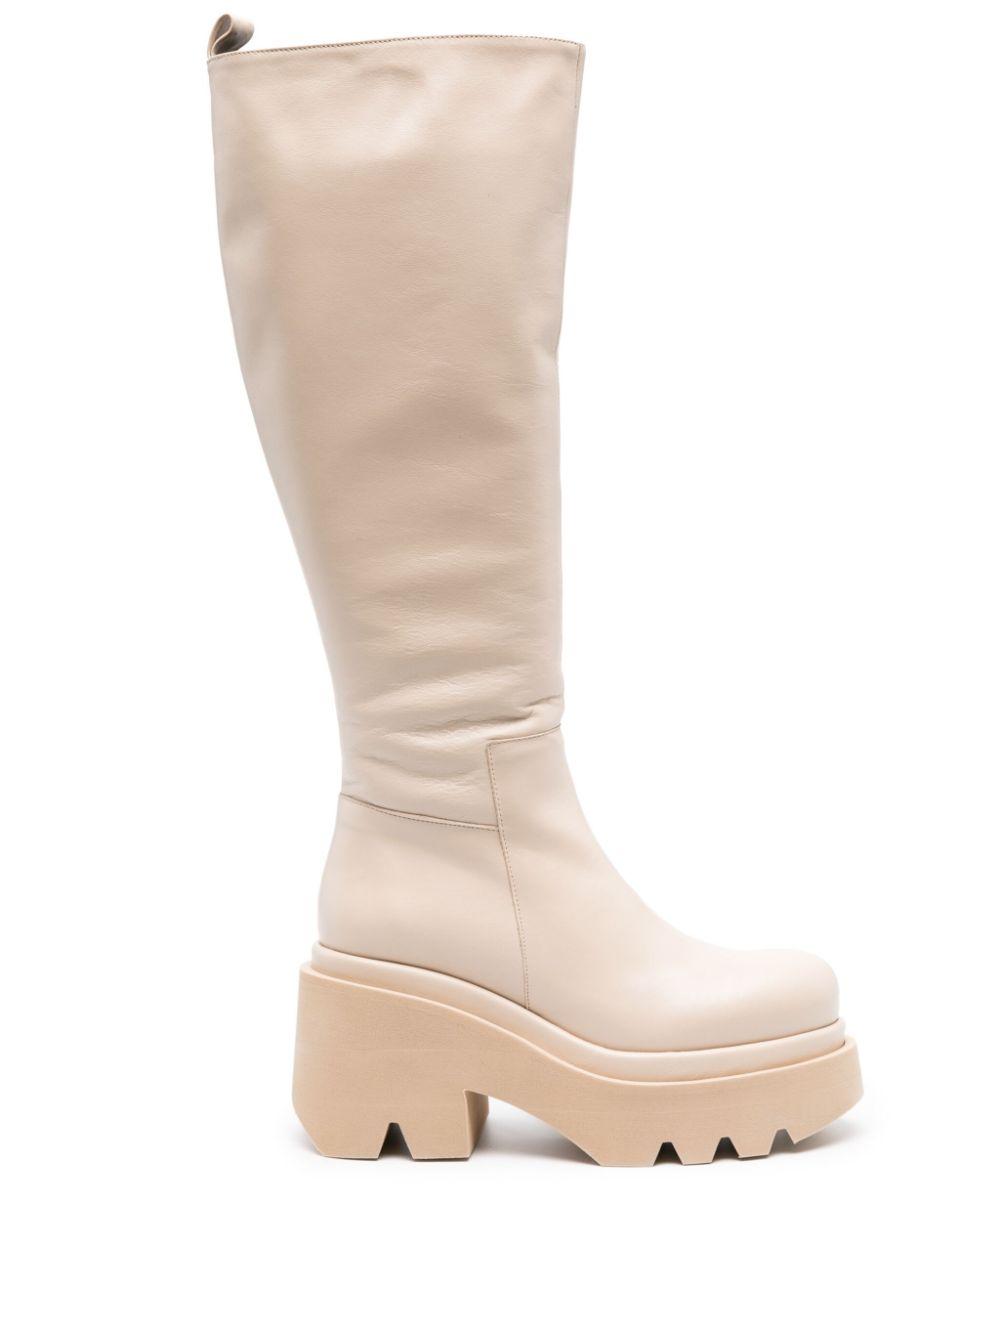 Paloma Barceló Leather Heel Boots in White | Lyst